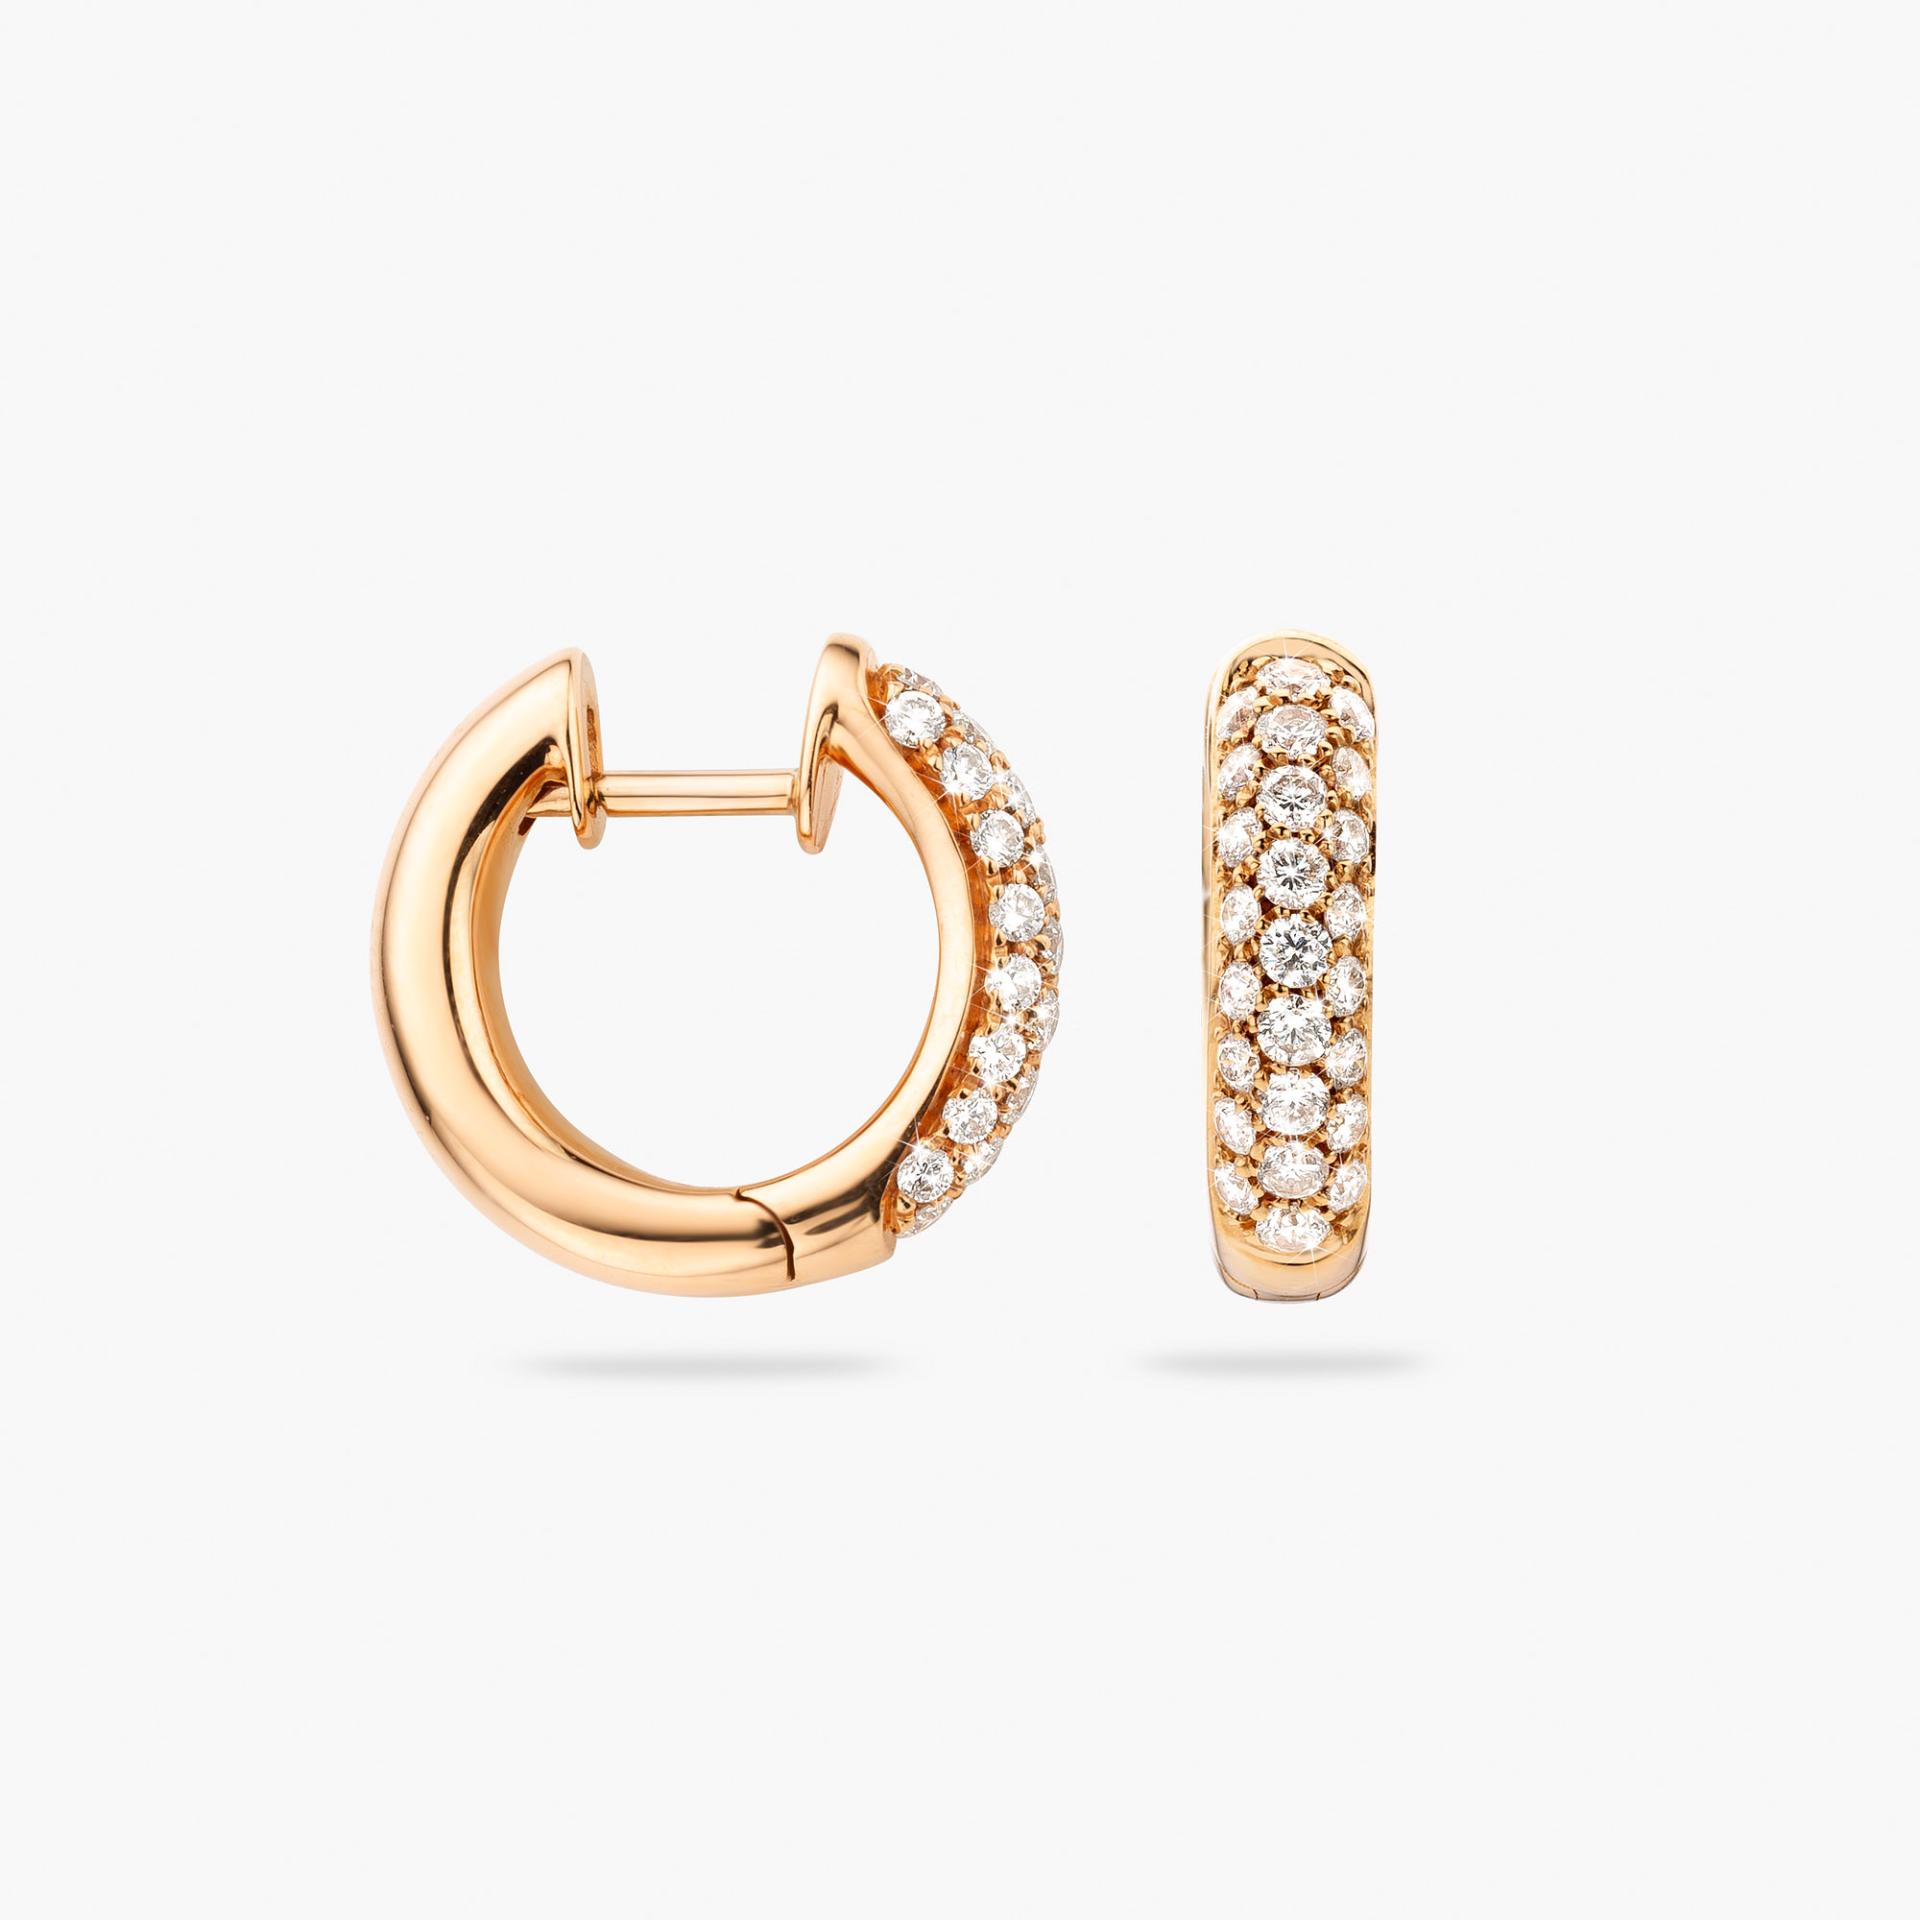 Rose gold earrings set with brilliants made by Maison De Greef